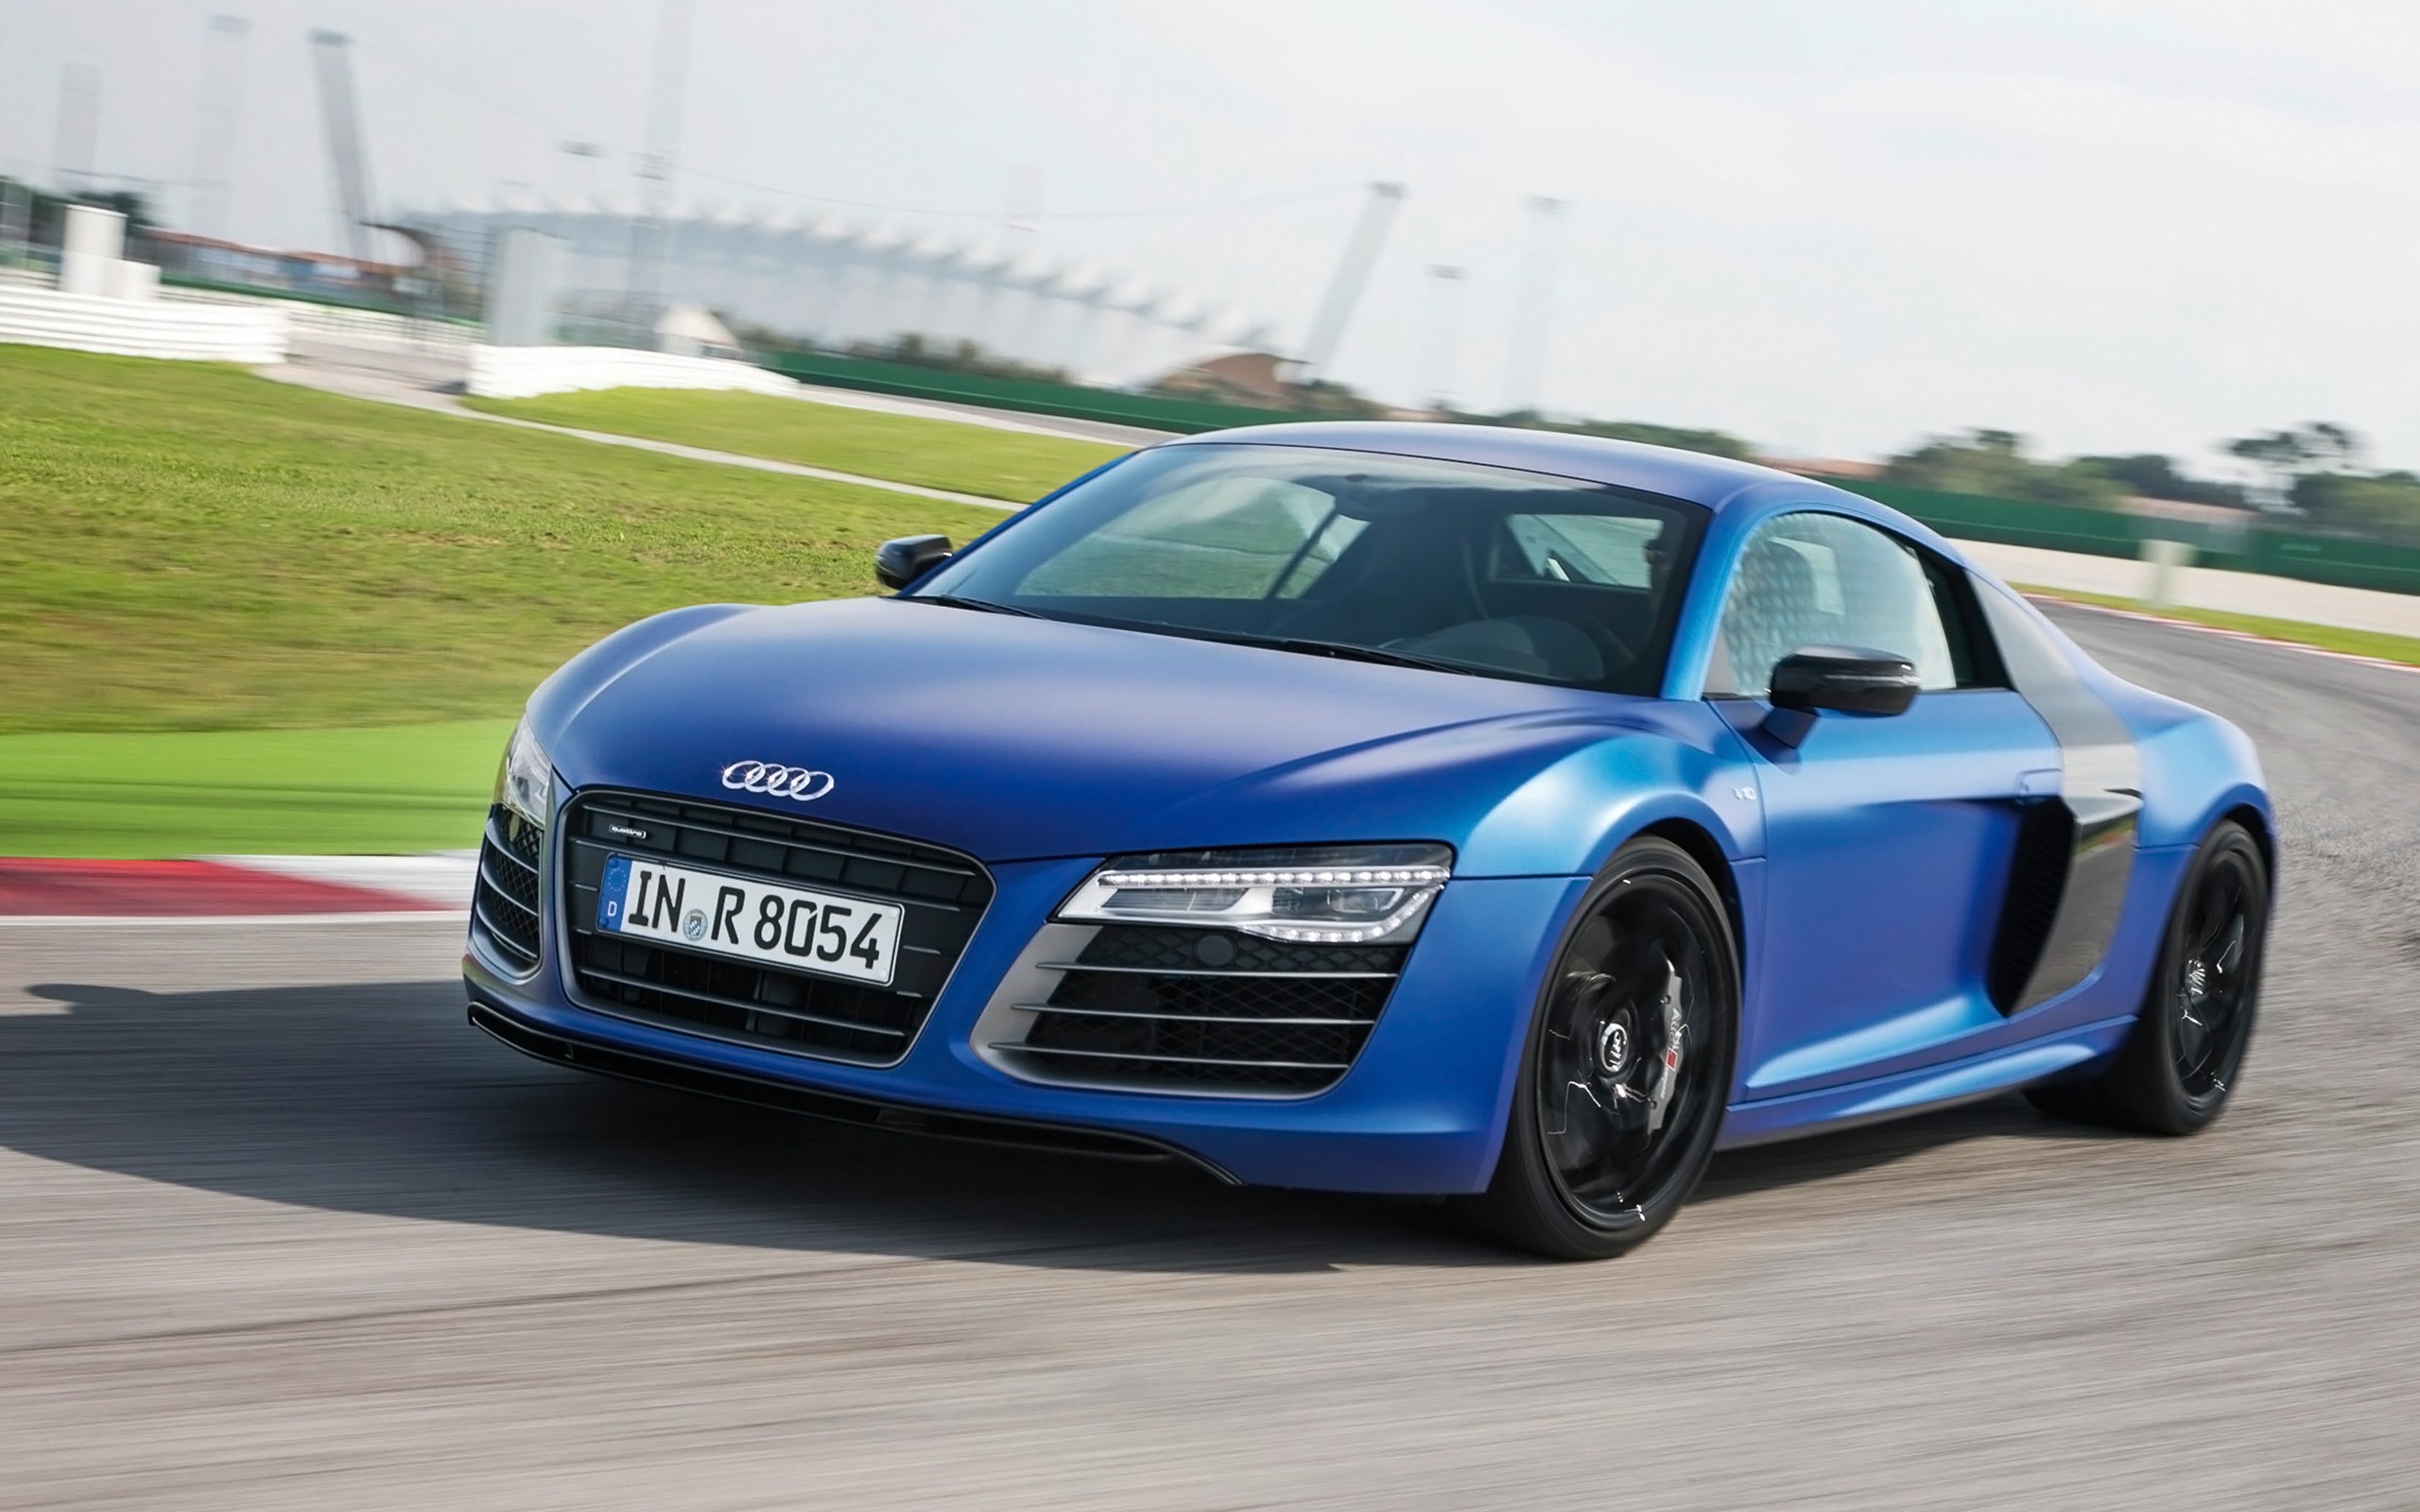 Free photo A blue Audi R8 in motion